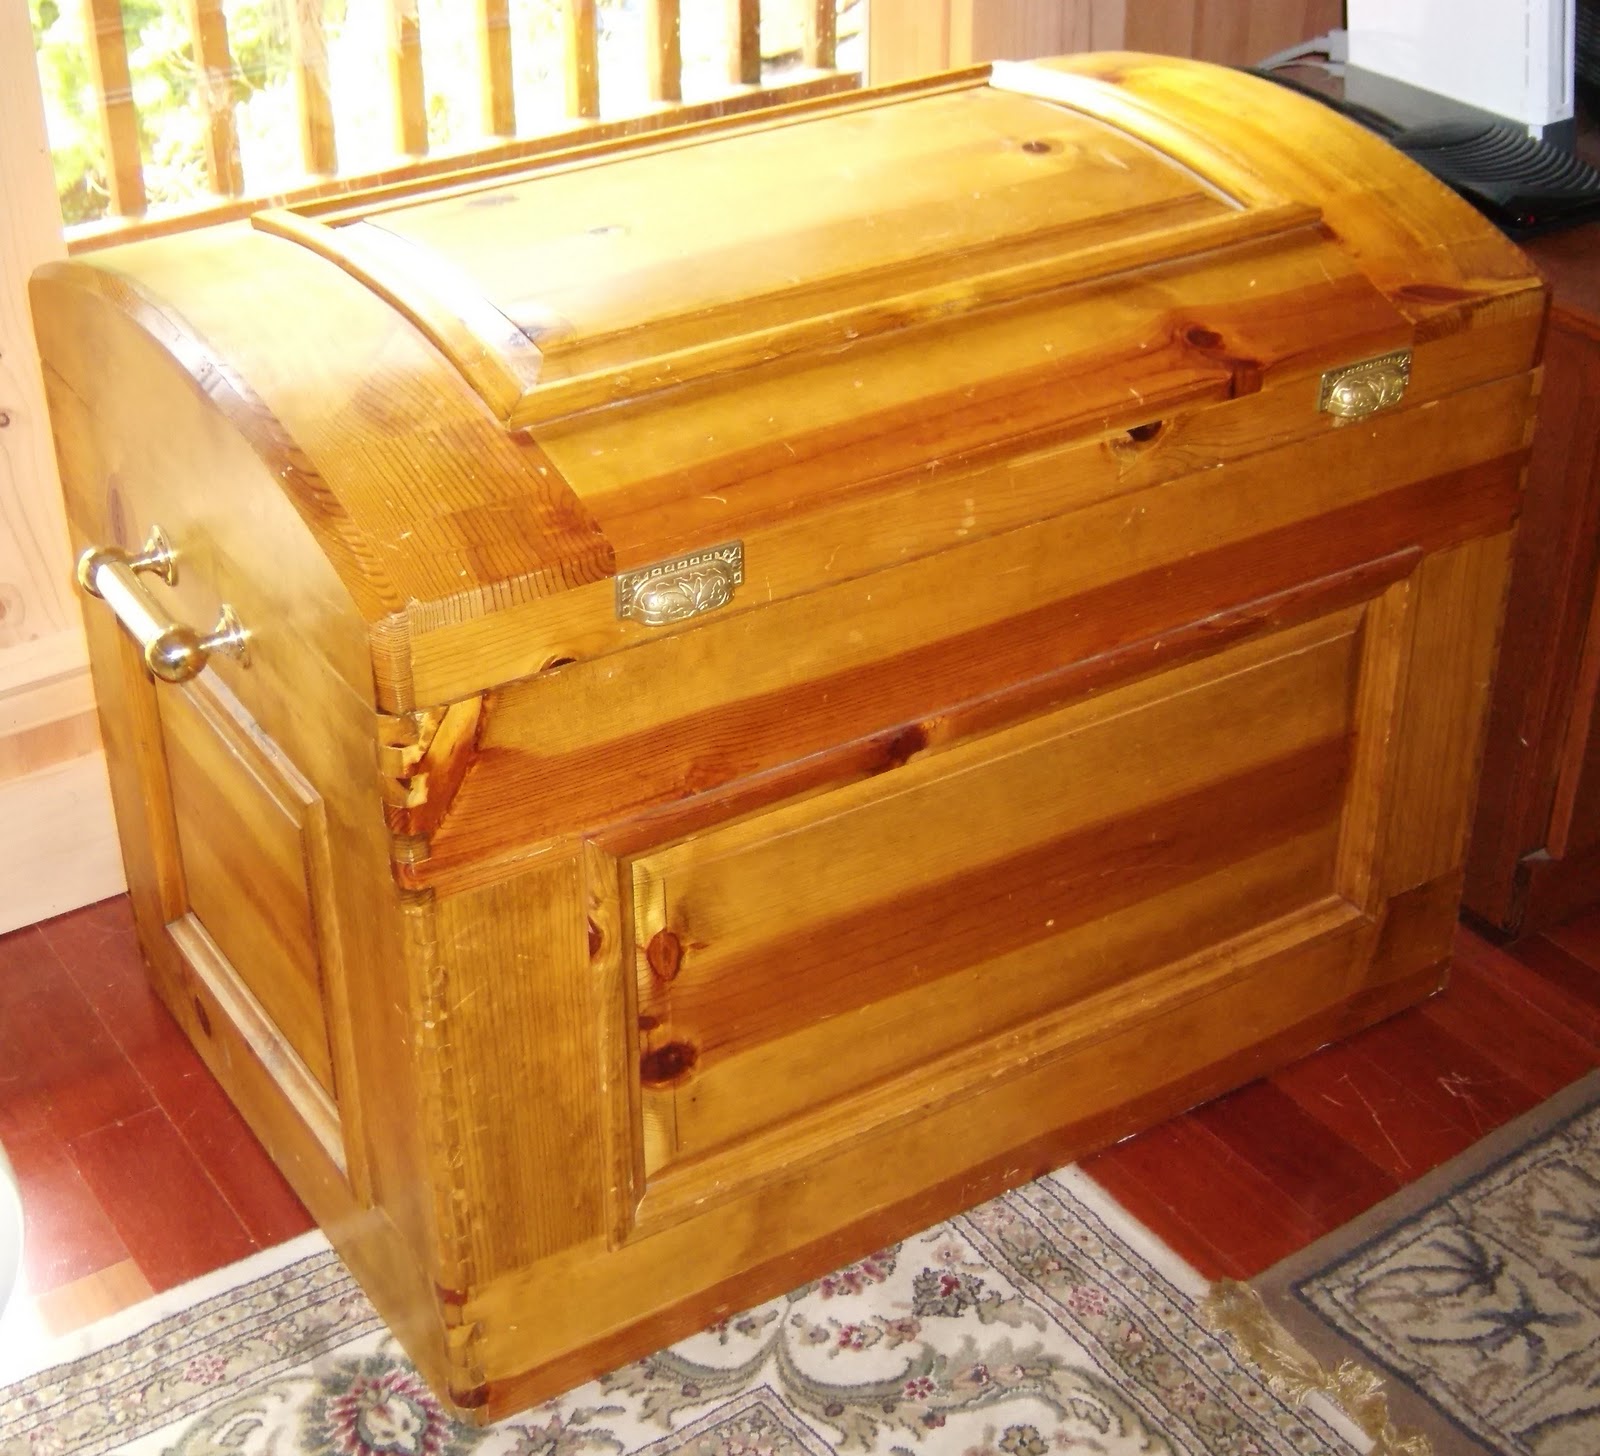 reclaimed wood chest / storage / bench by